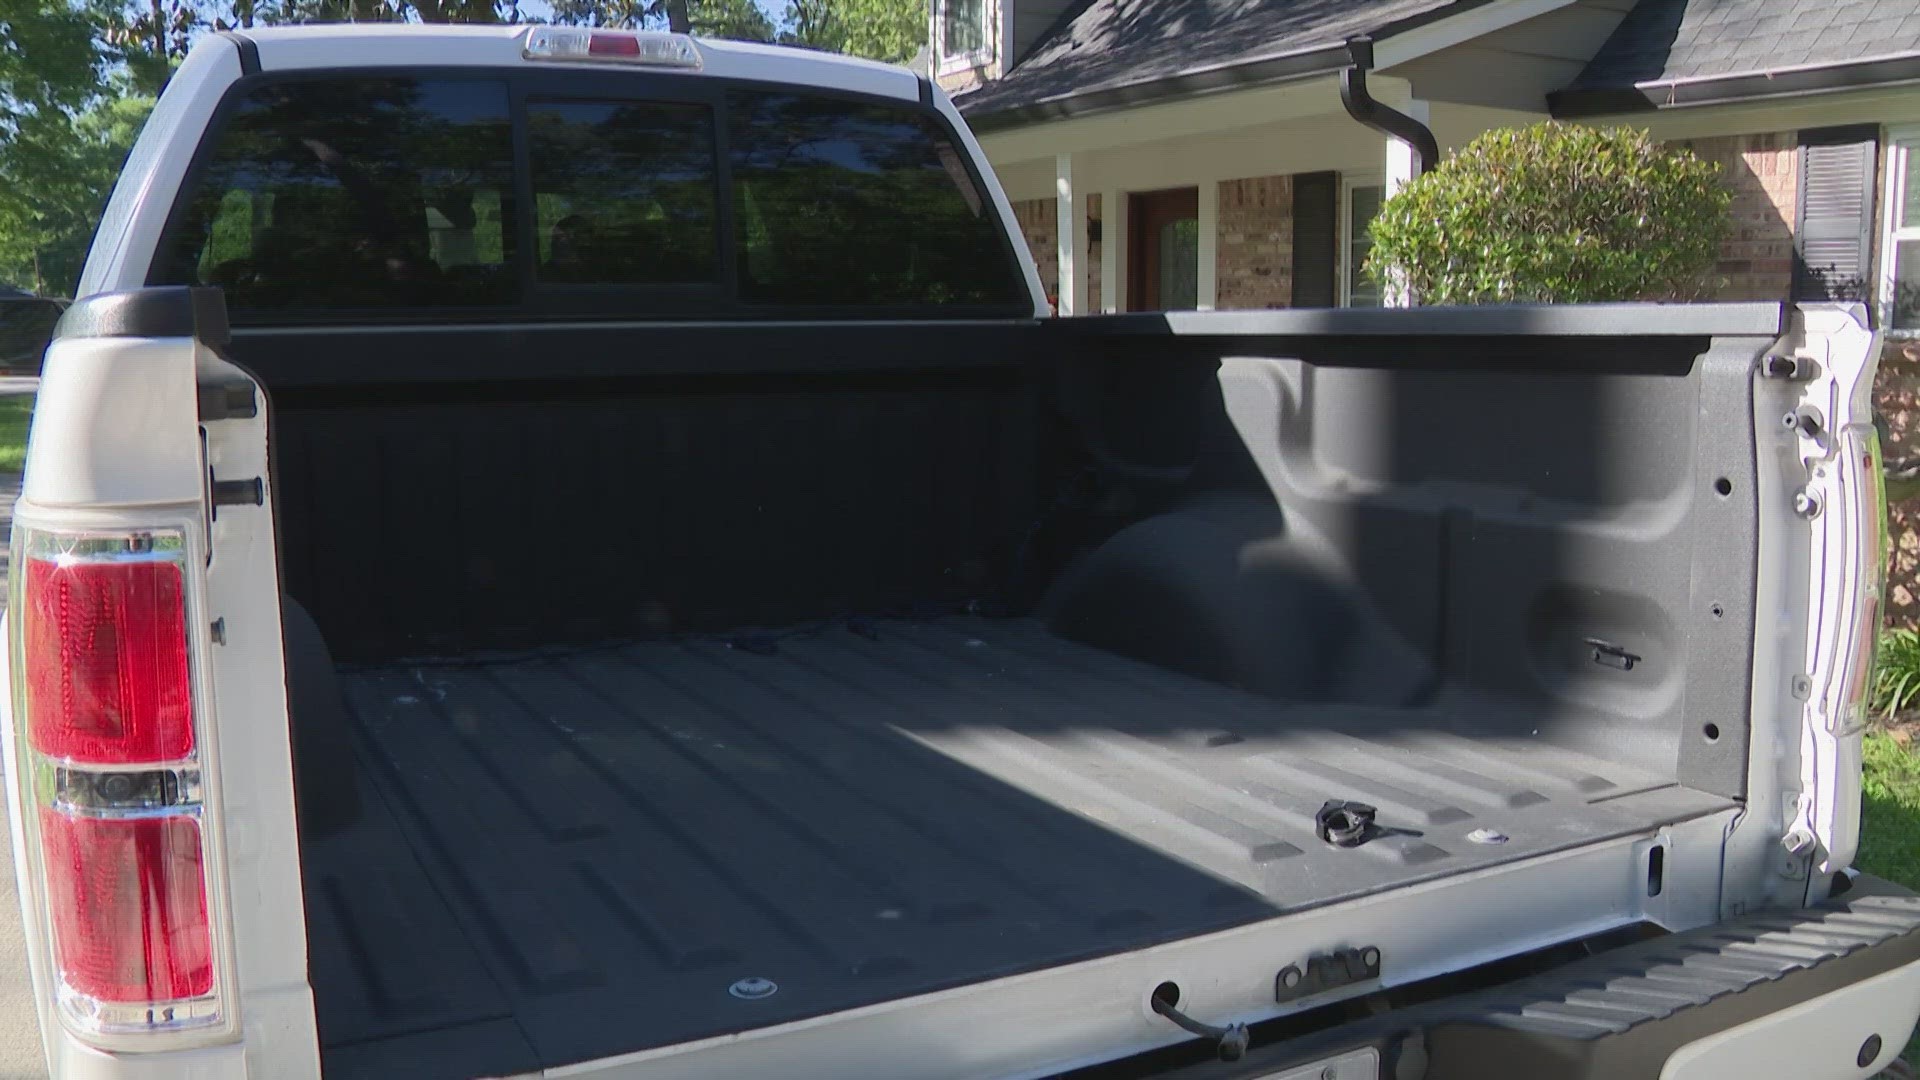 A Kingwood man is warning others after his truck's tailgate was stolen twice in a matter of months--first in Porter, then in the Heights on Tuesday night.